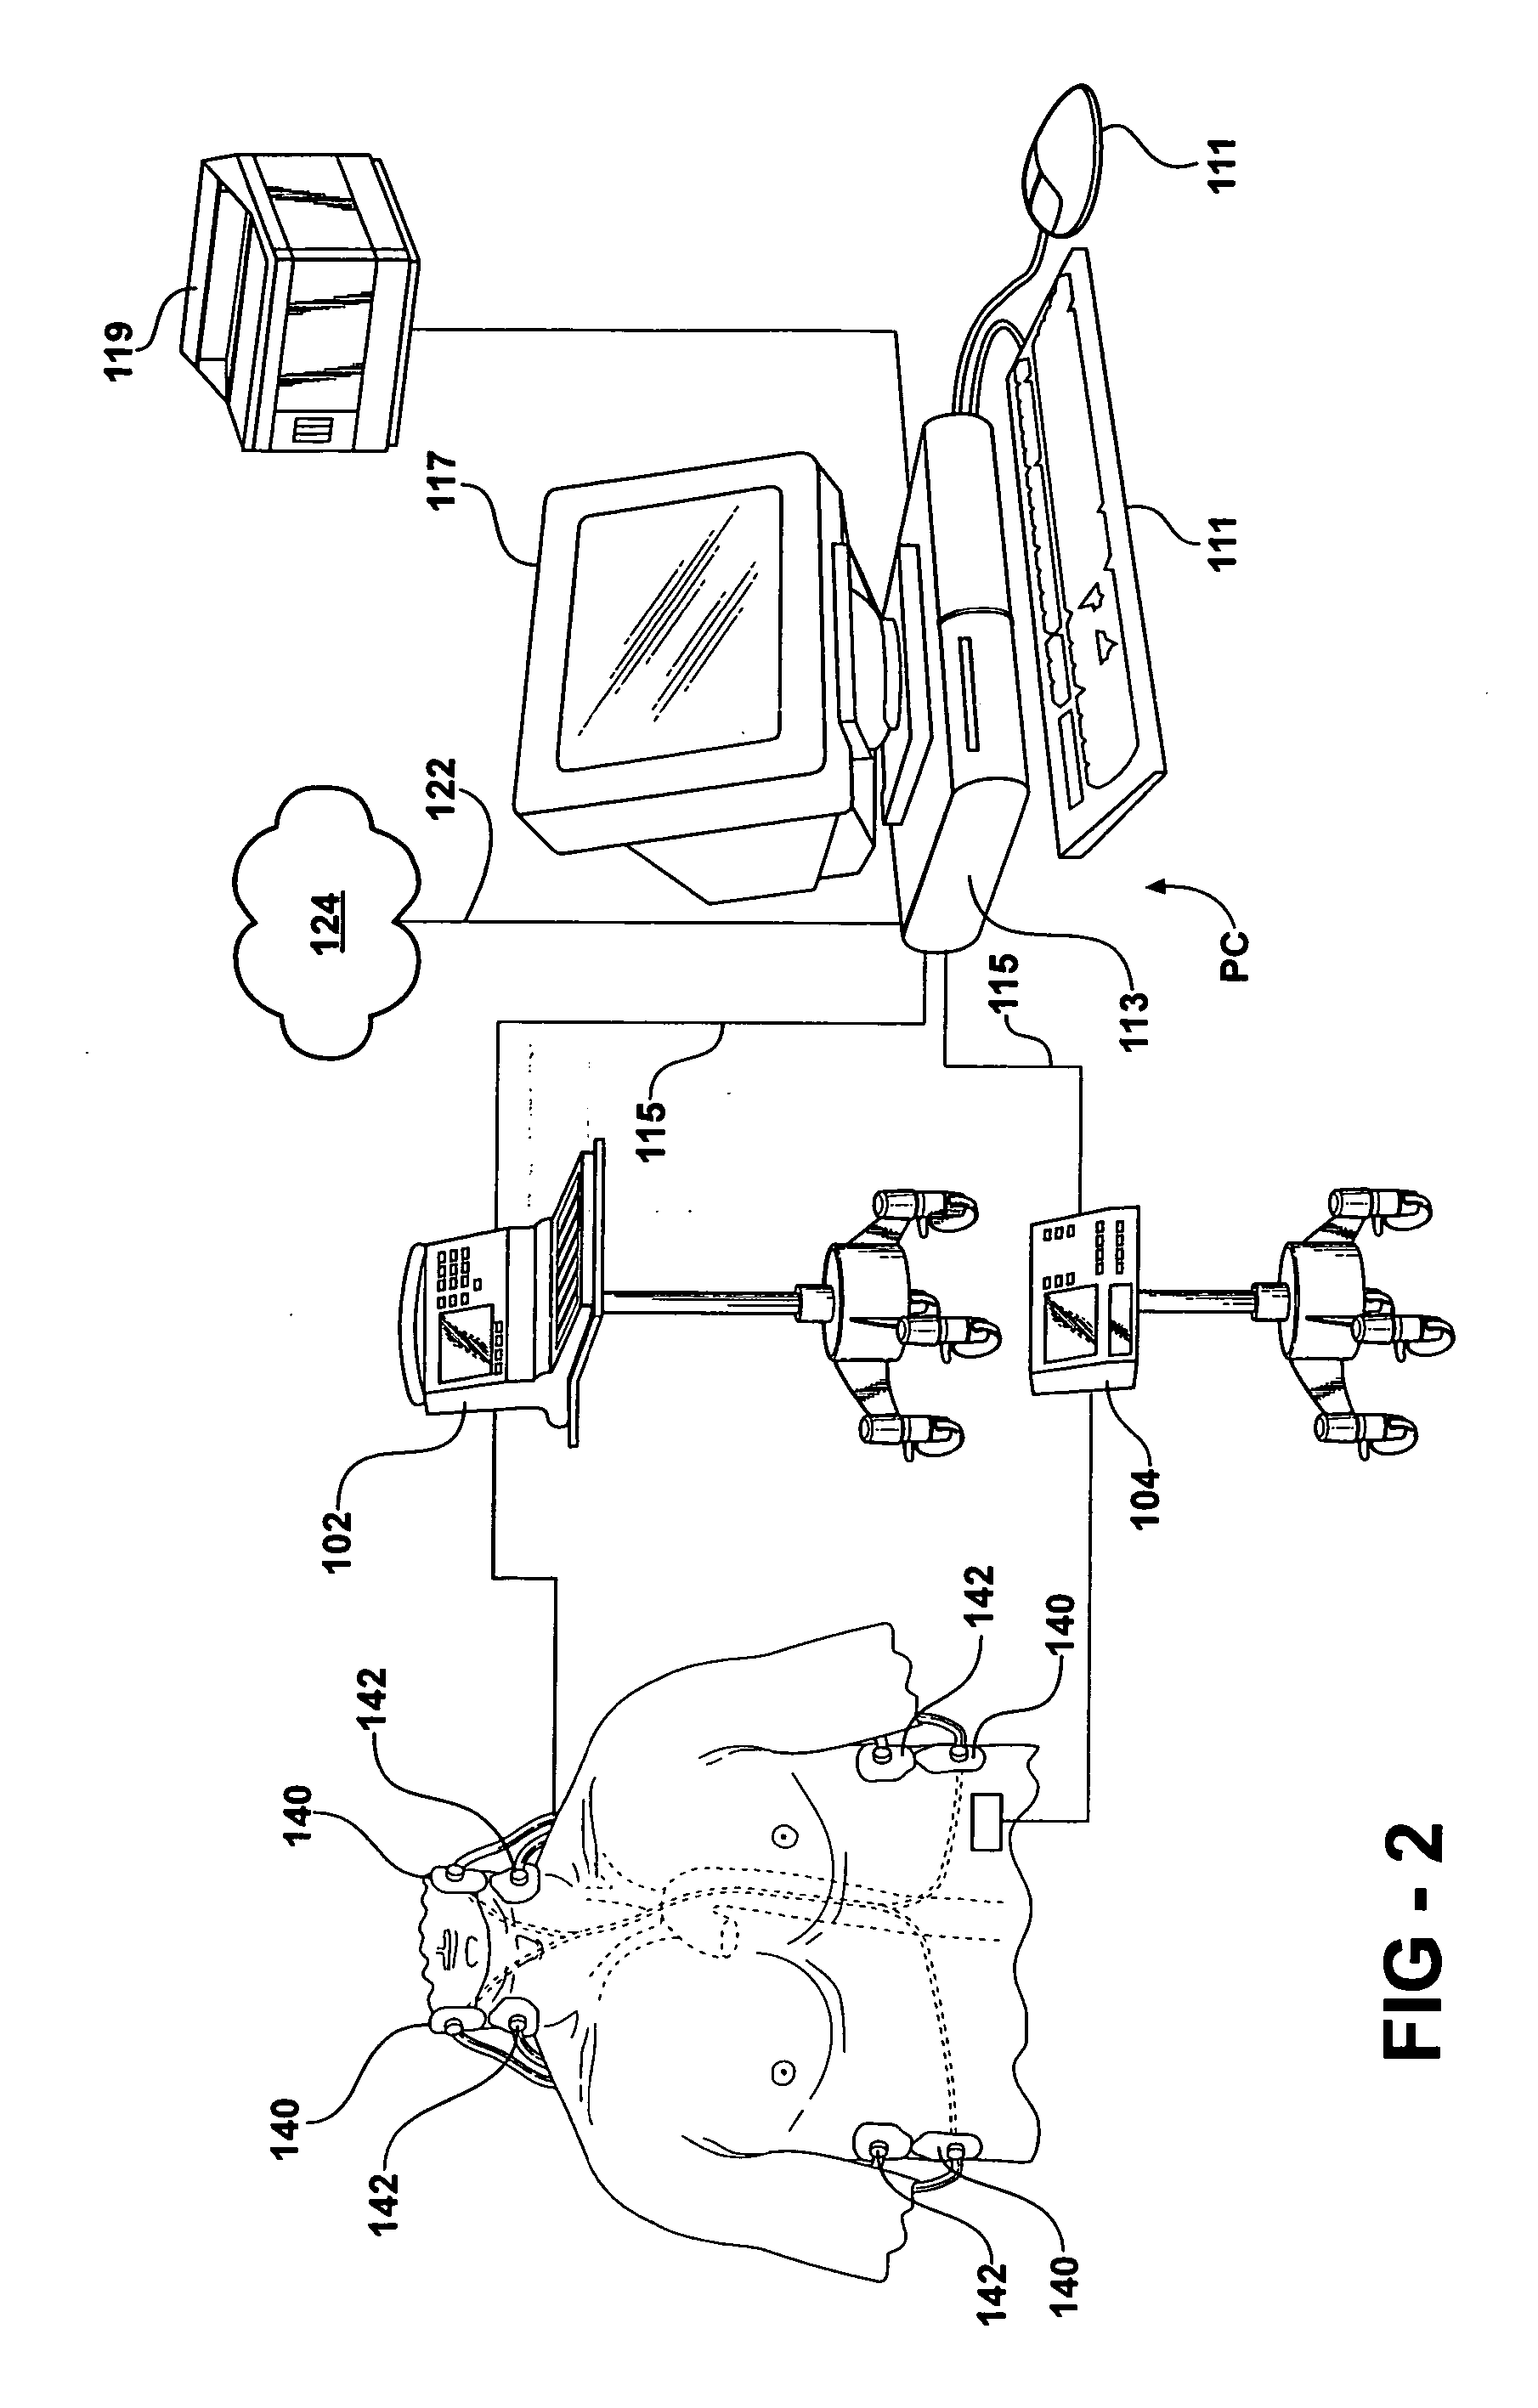 System and method for evaluating, monitoring, diagnosing, and treating hypertension and other medical disorders